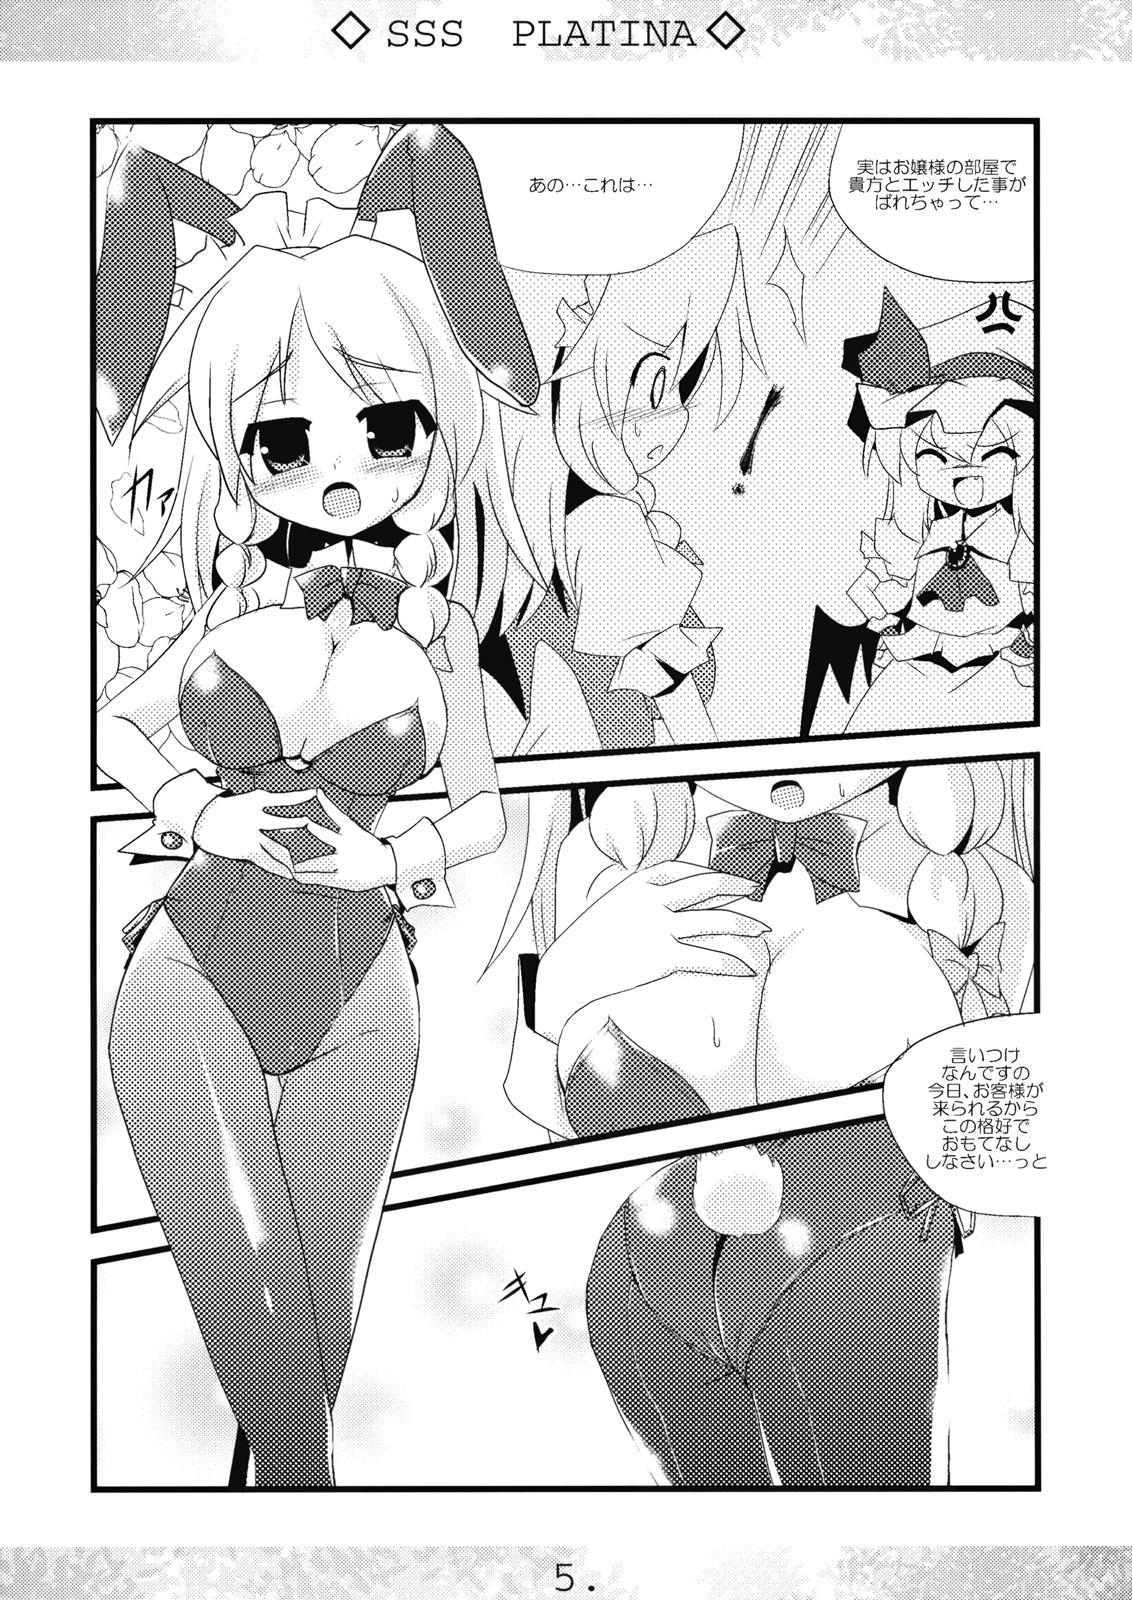 Couple Sex SSS PLATINA - Touhou project Cum Swallowing - Page 5